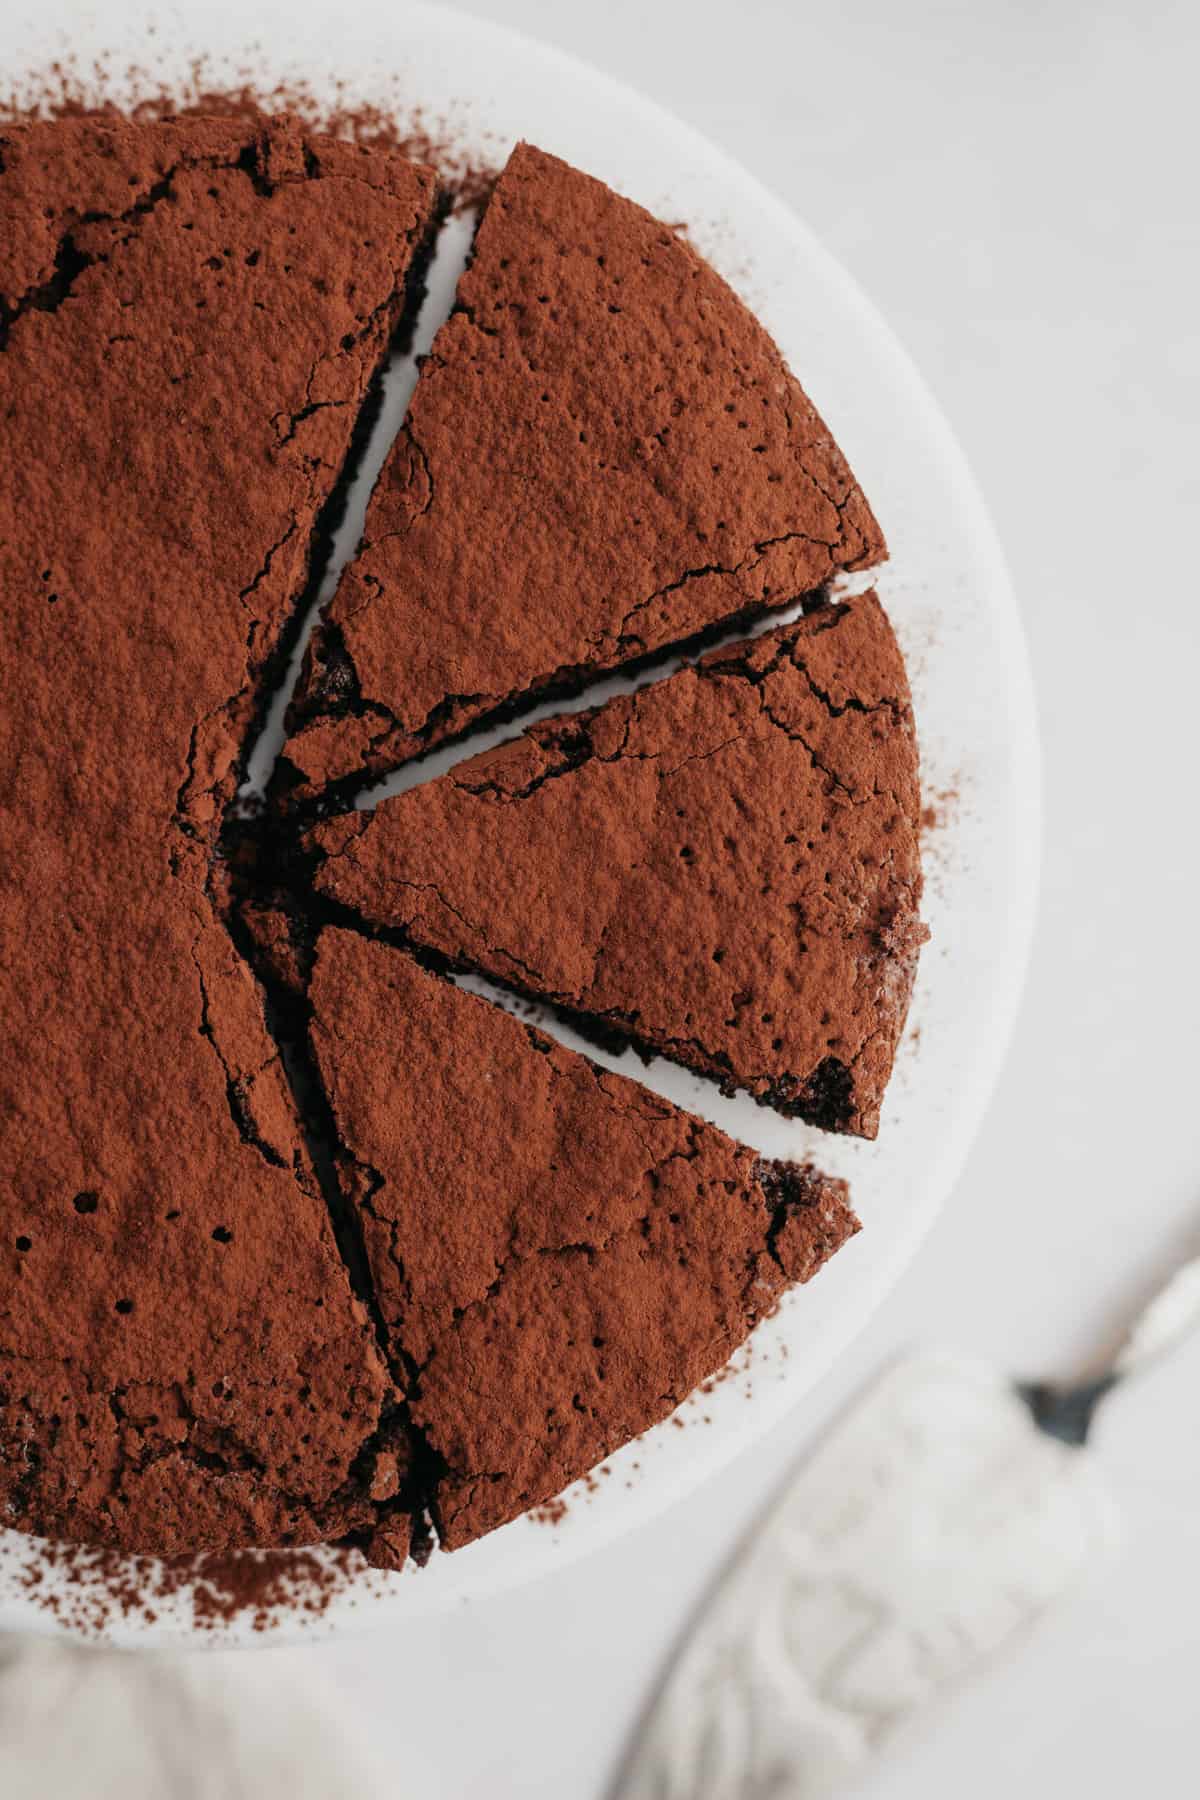 overhead view of slices of chocolate cake dusted with cocoa powder